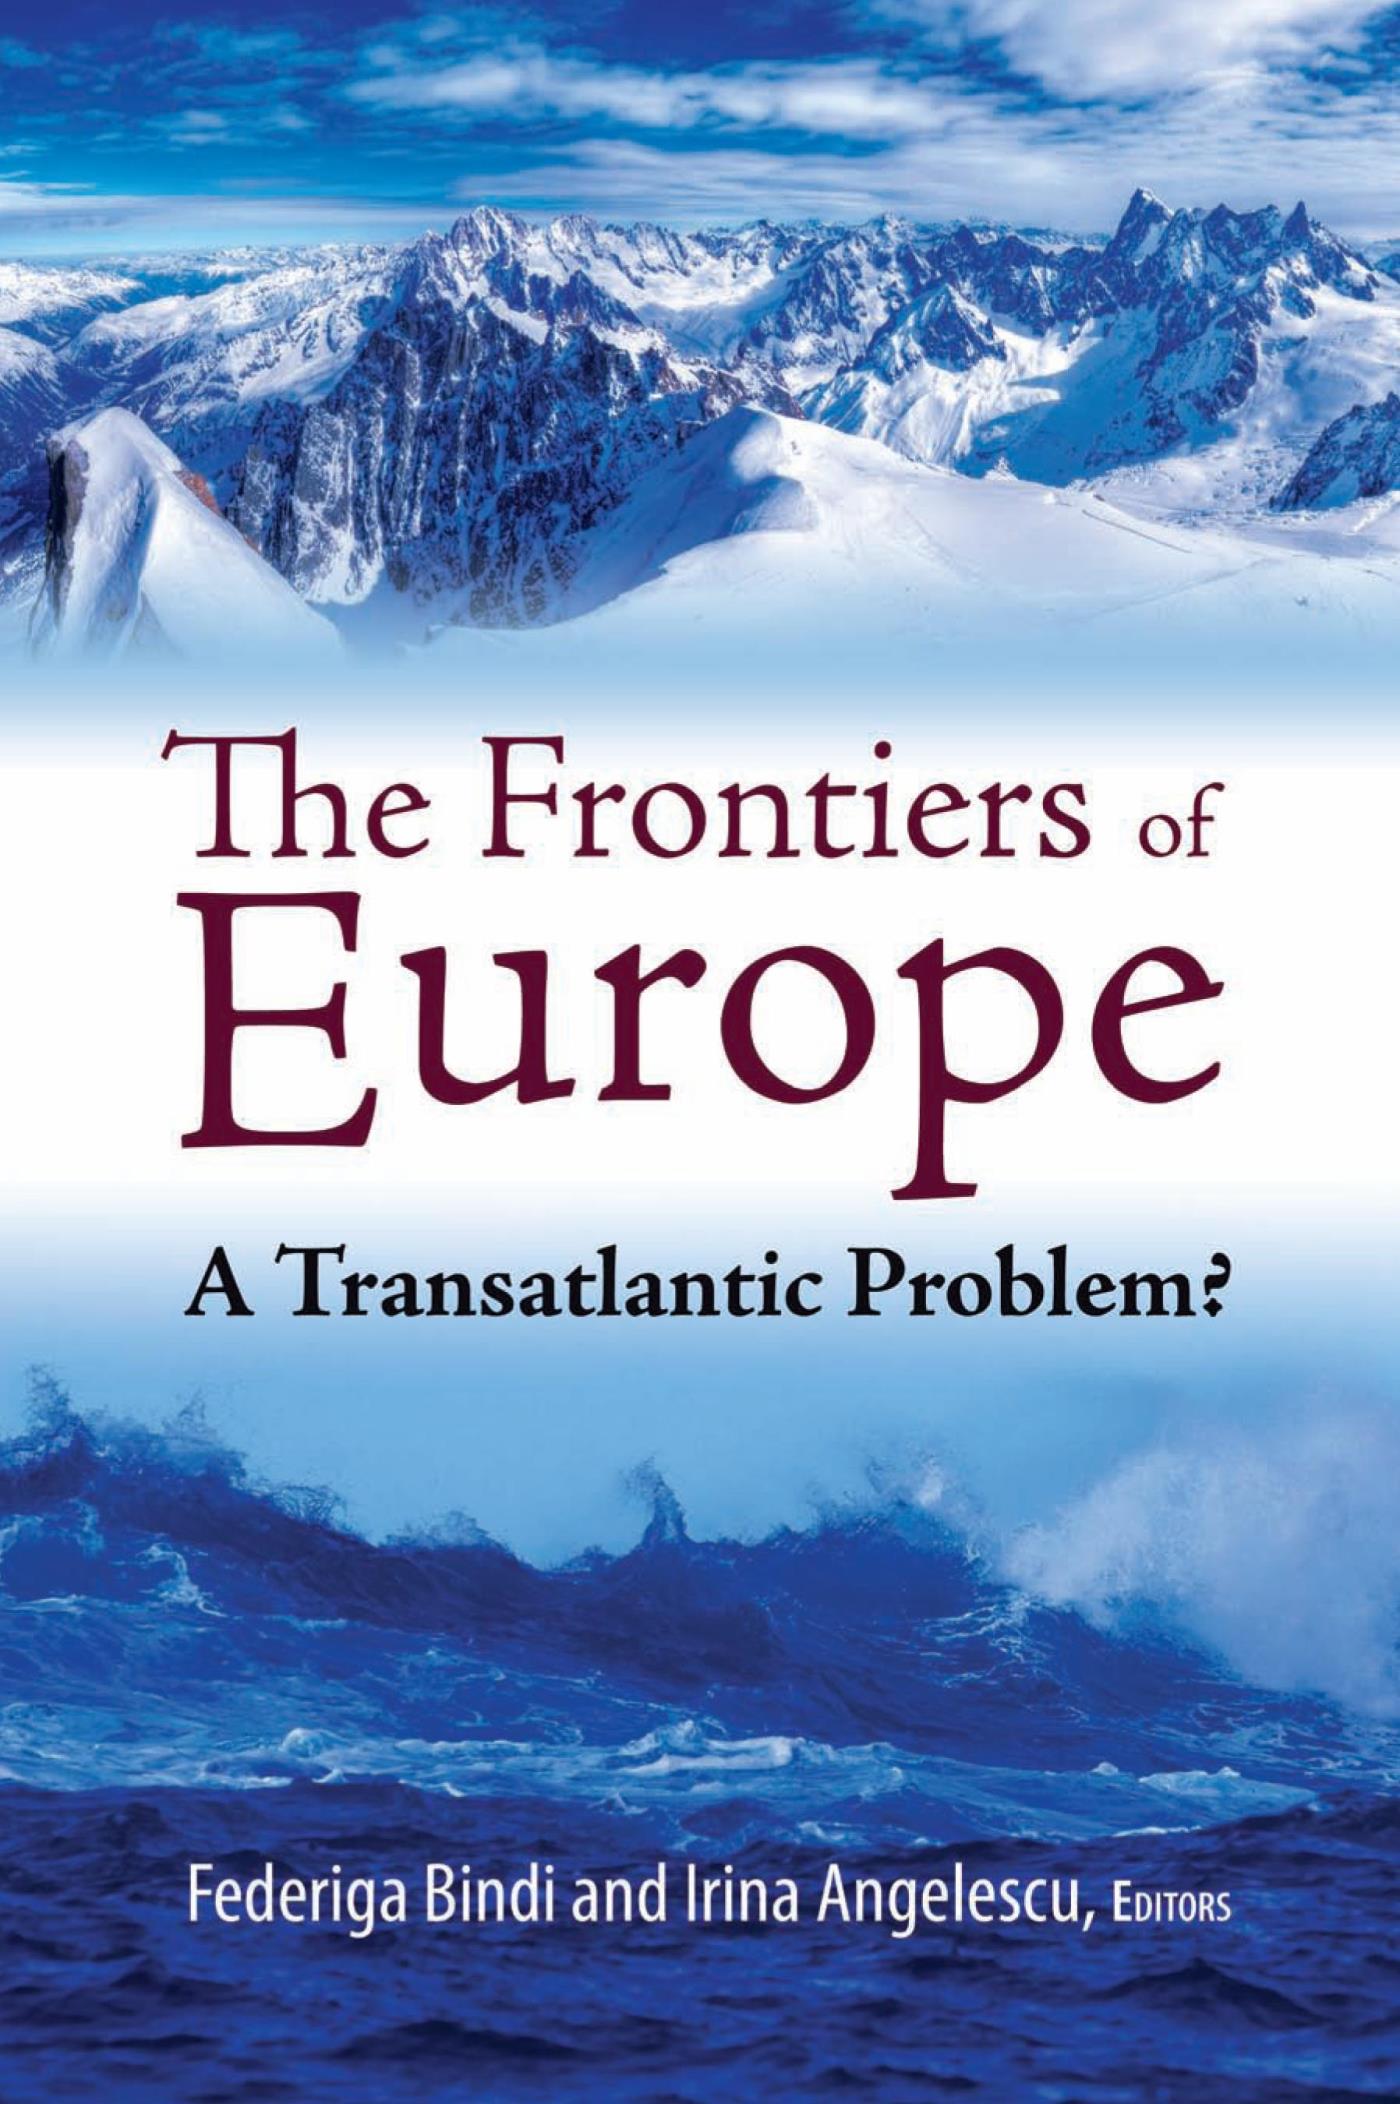 The Frontiers of Europe